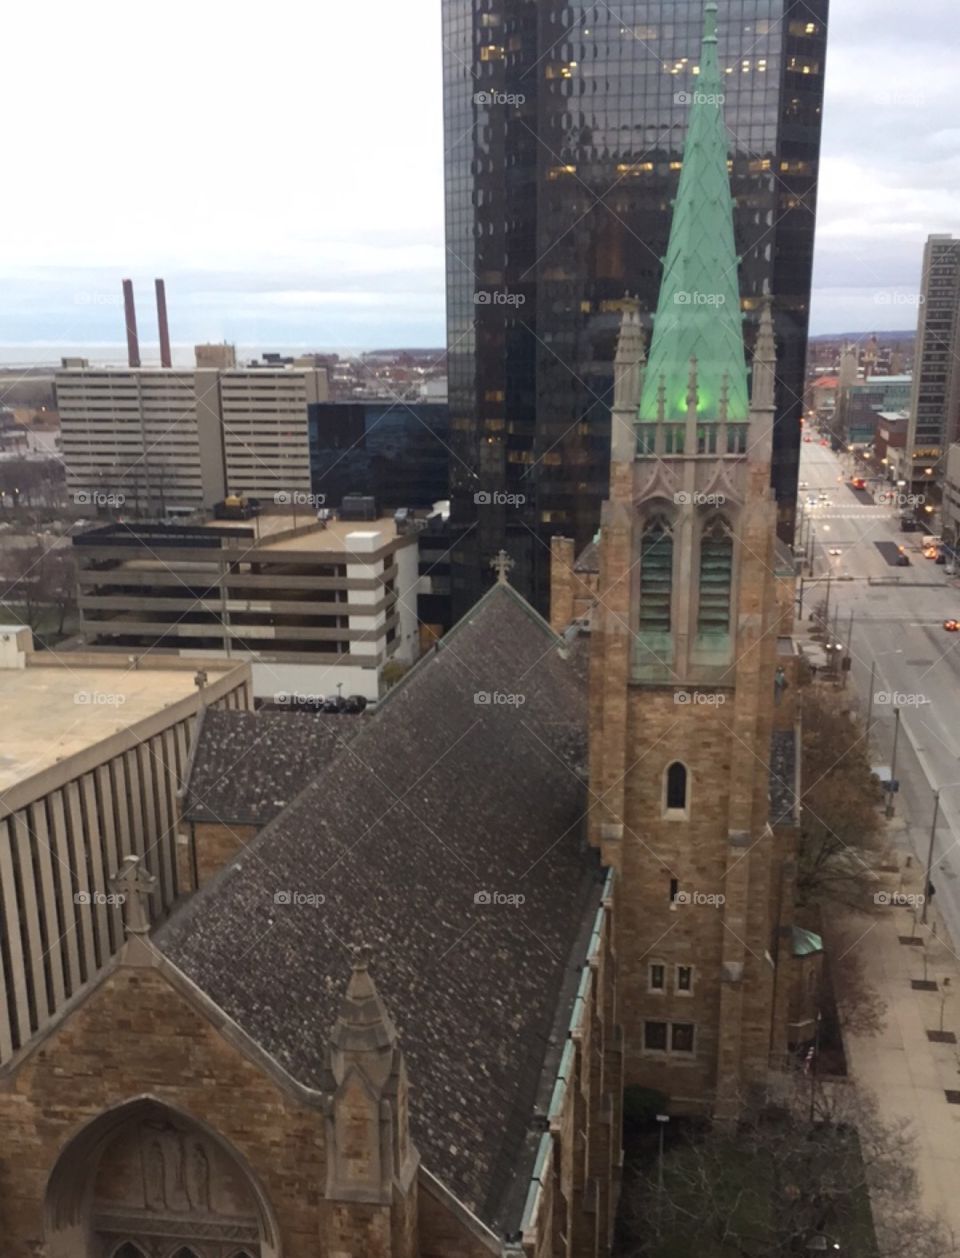 Church in Cleveland, Ohio. Beautiful lake scene beyond the city and stark contrasting architecture from high above.